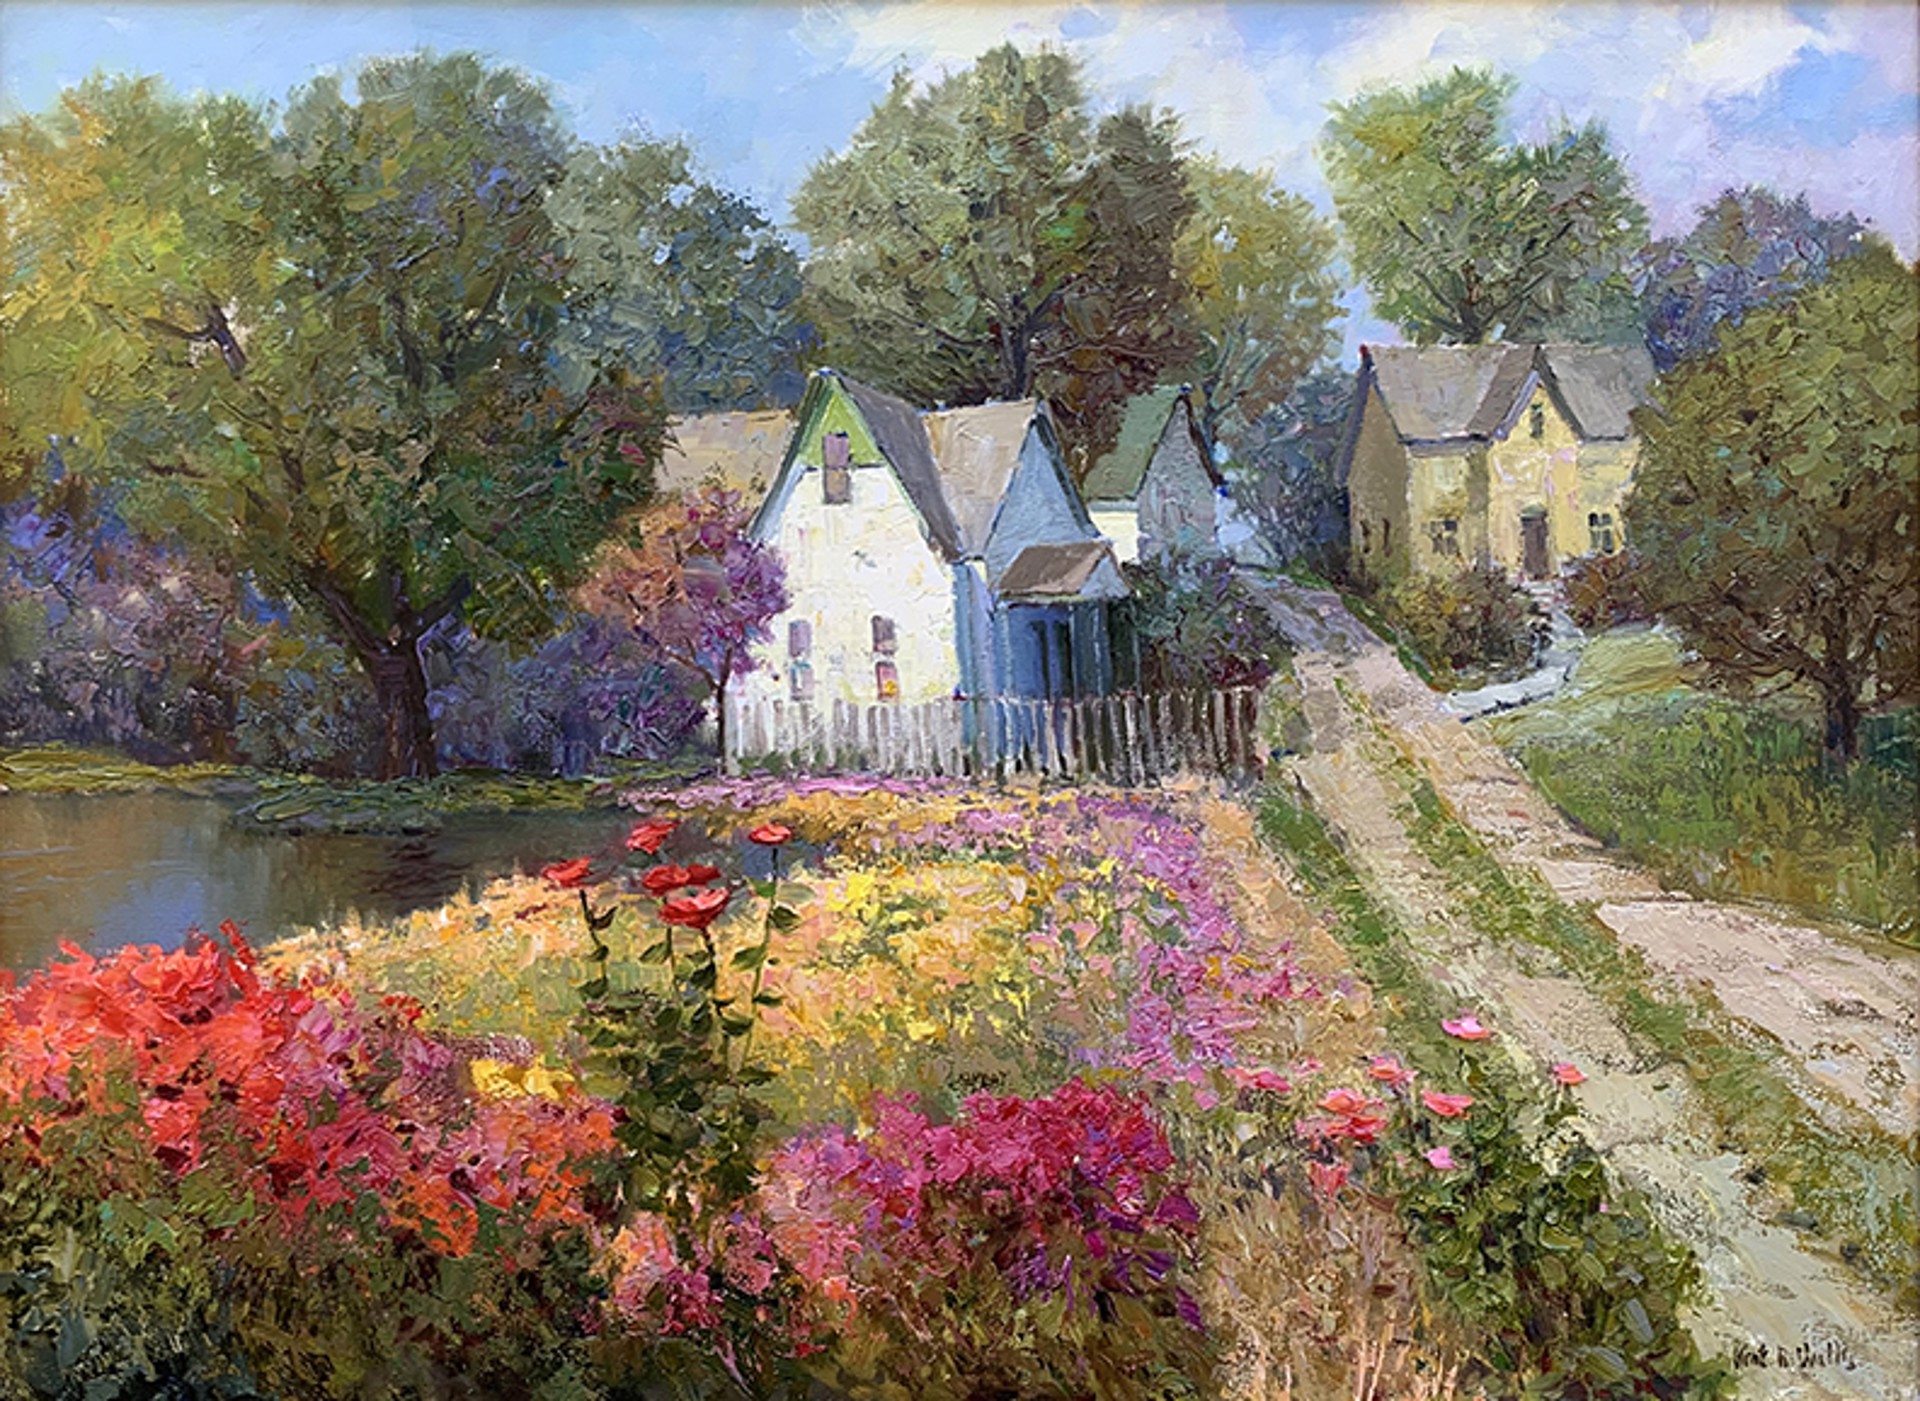 Blissful Countryside by Kent R. Wallis